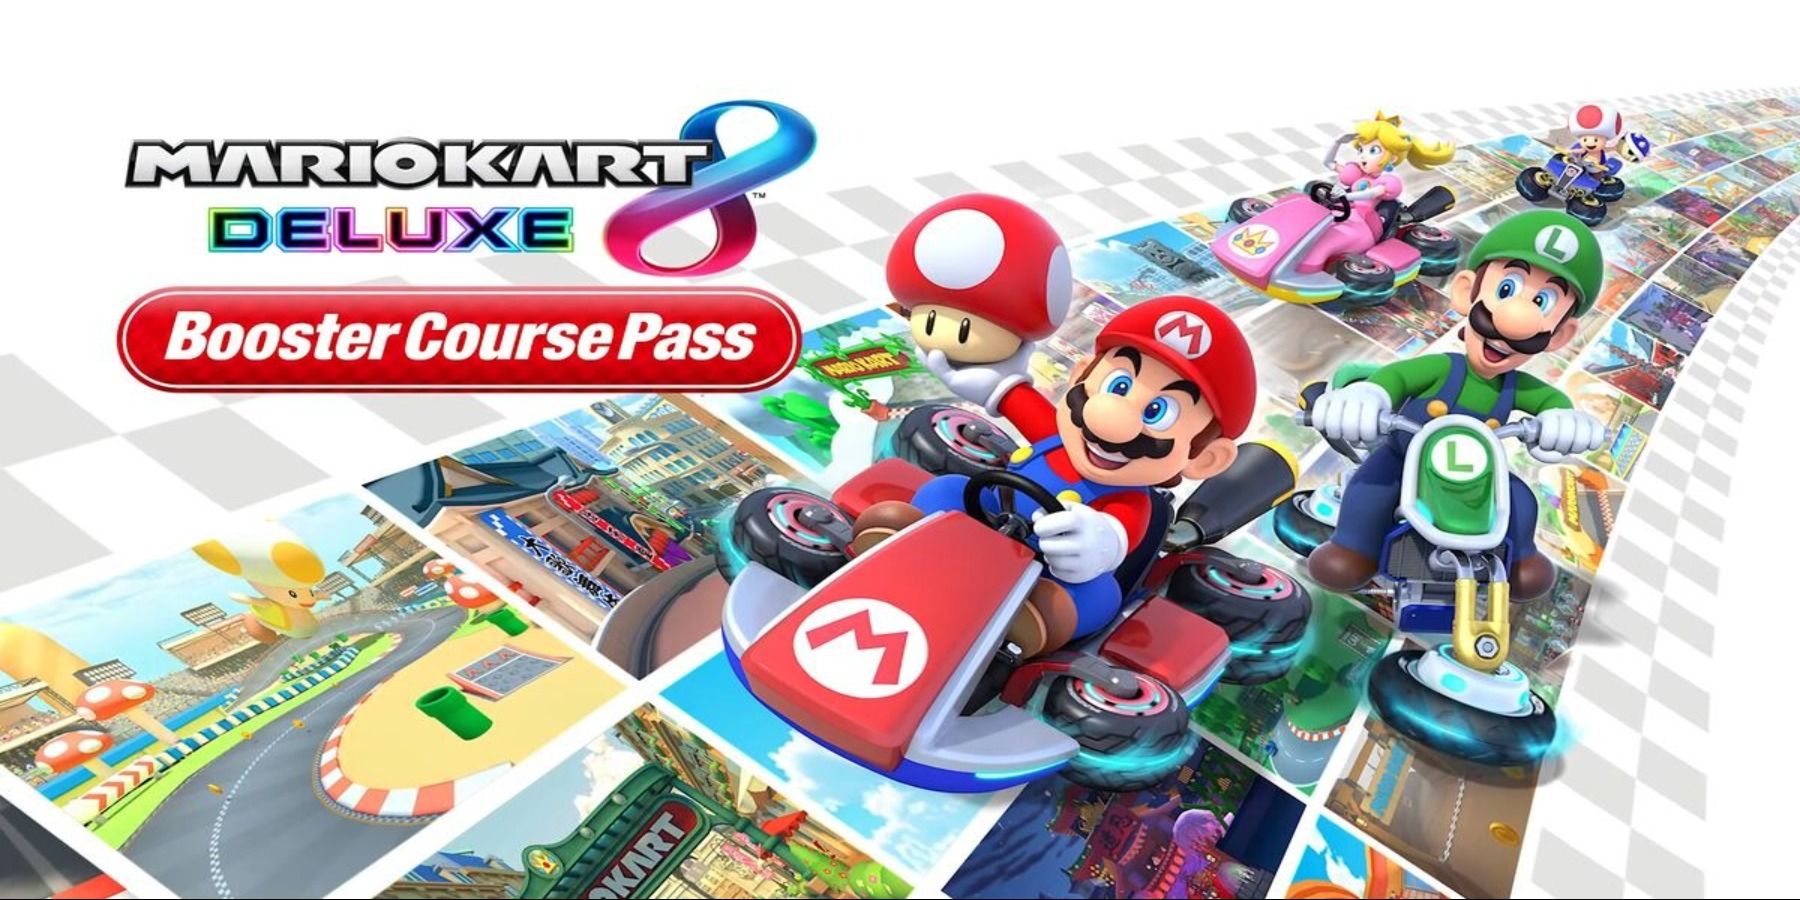 Mario Kart 8 Deluxe Booster Course Pack Key Art Thumbnail